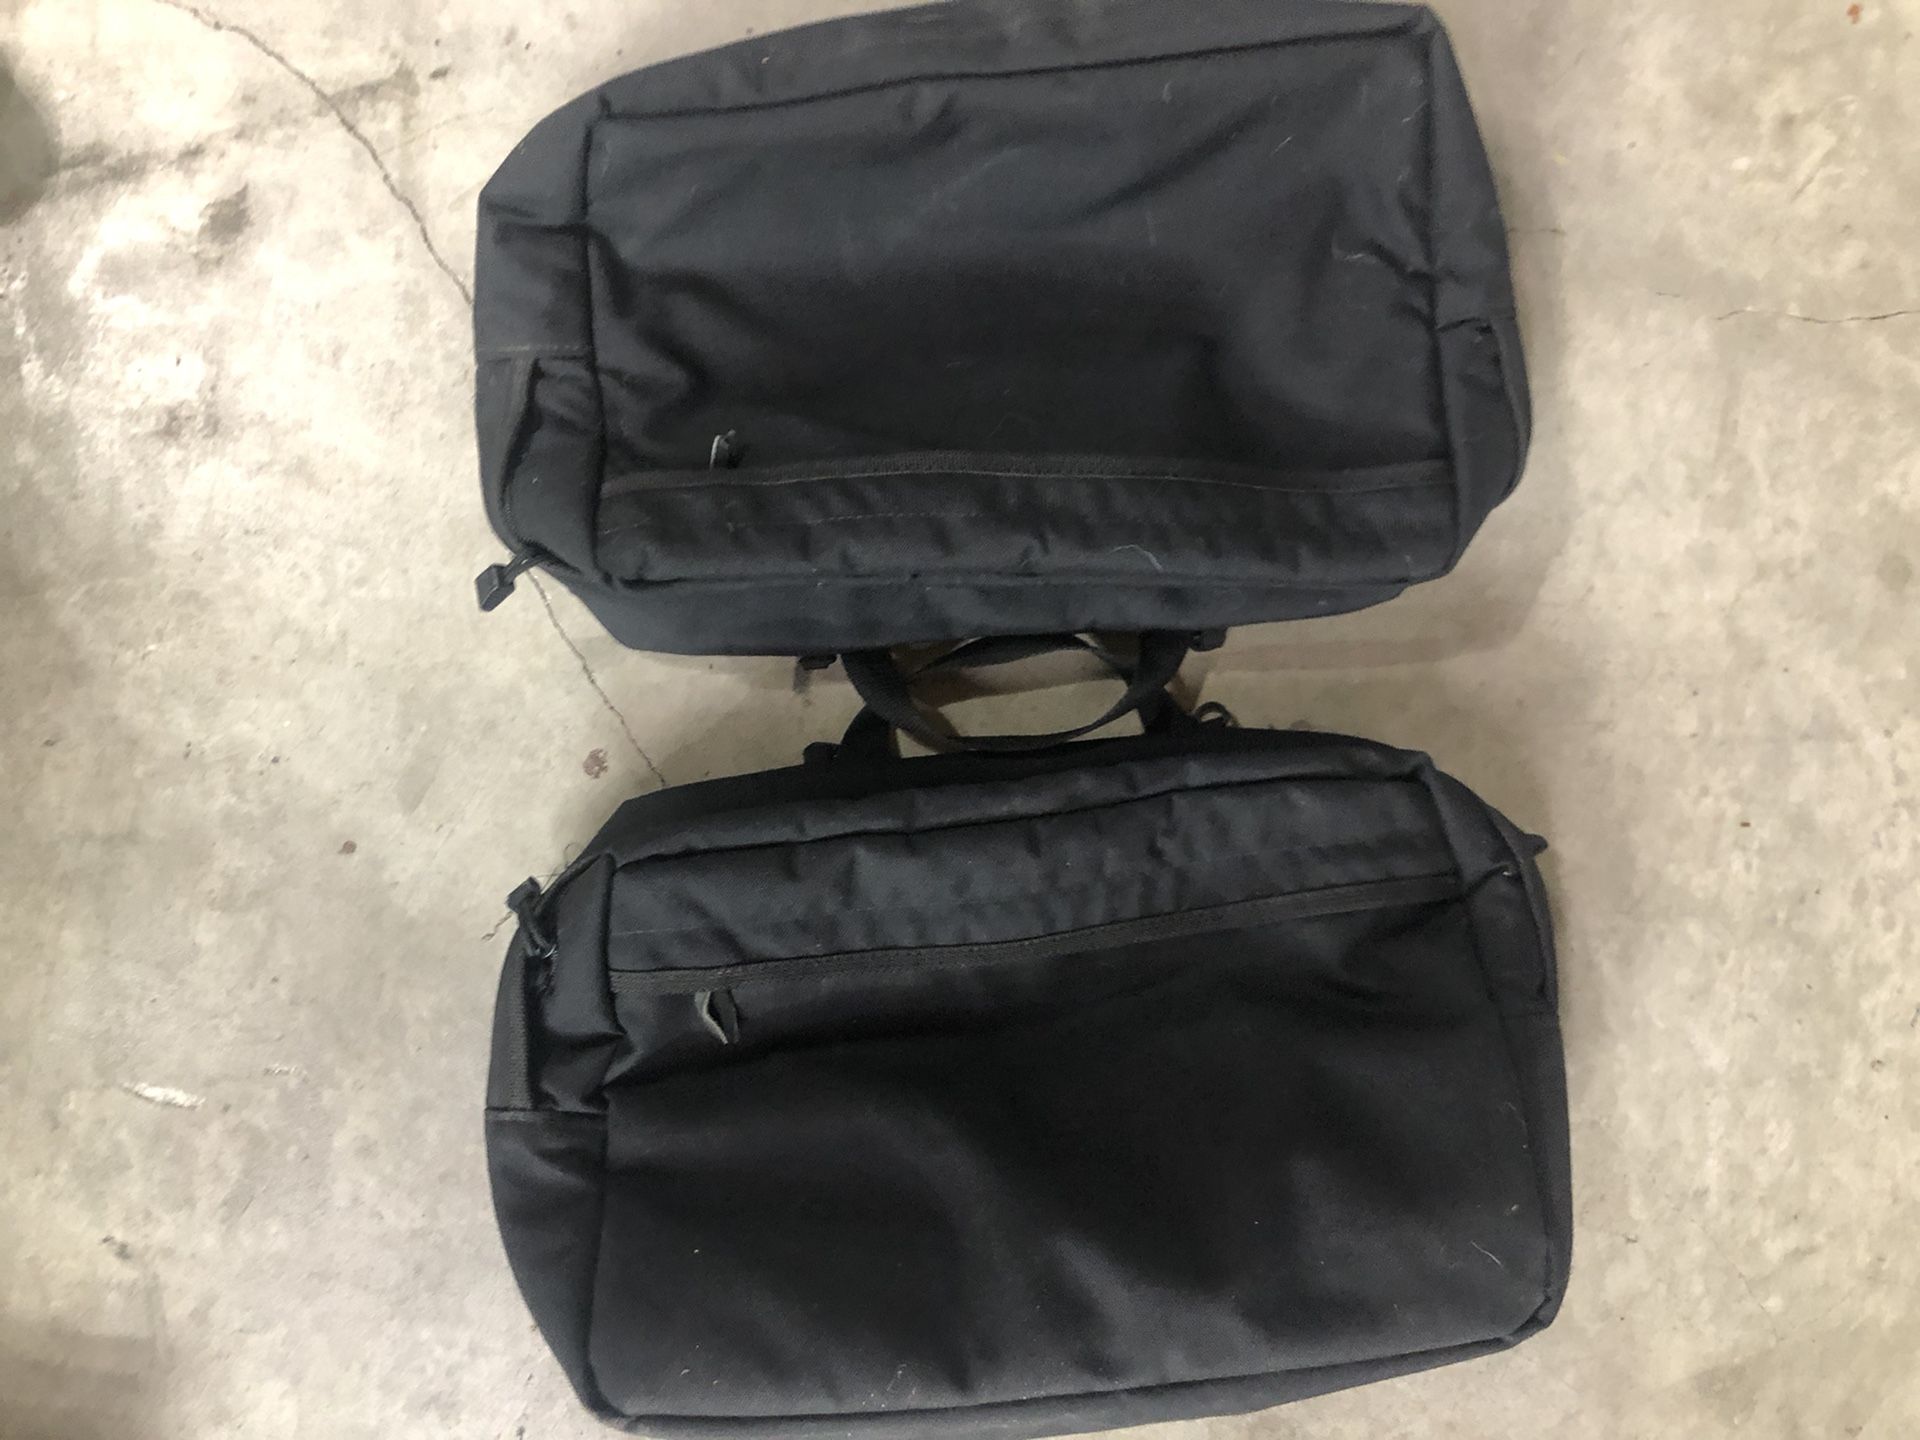 Buck’s Bags storage bags for motorcycle saddlebags